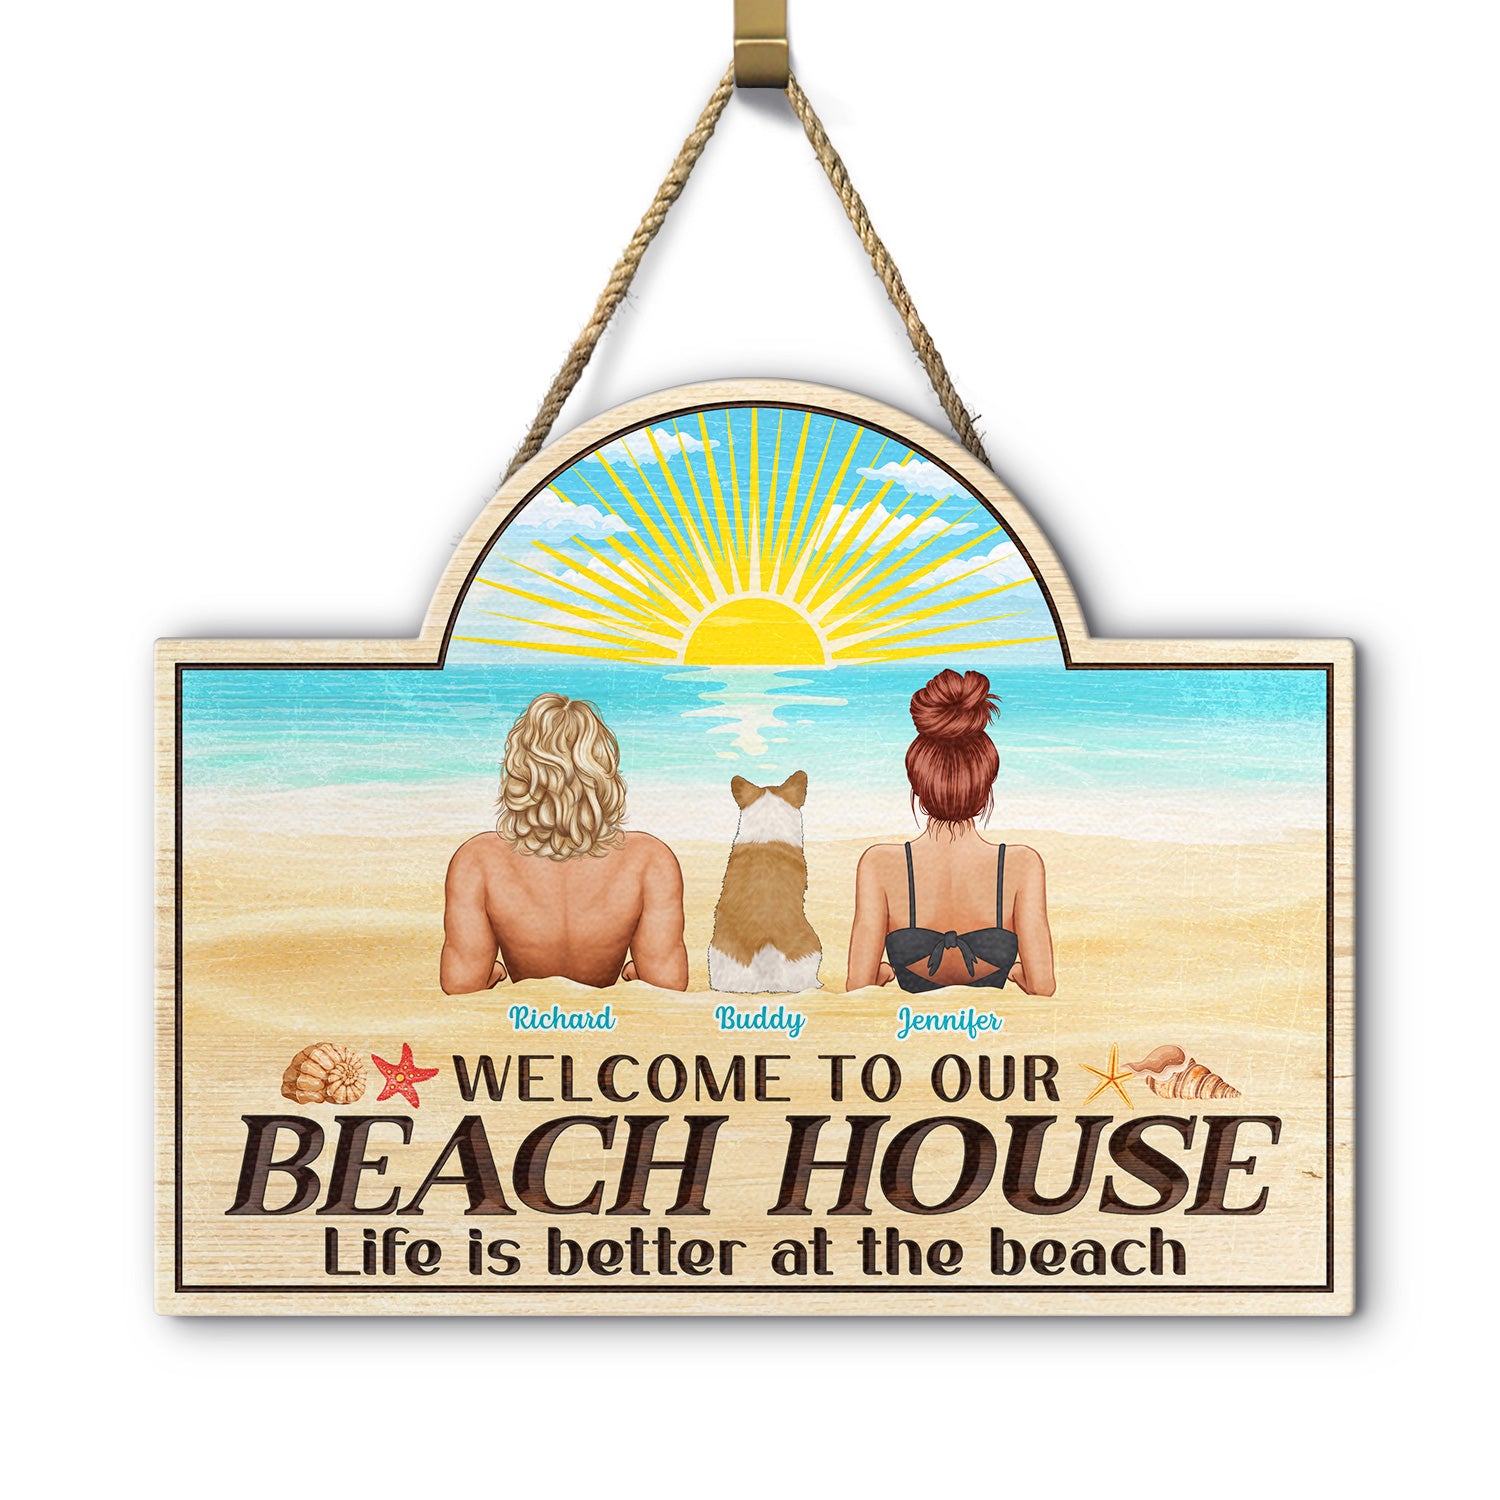 Life Is Better At The Beach - Beach House Decor Gift For Dog Couple - Personalized Custom Shaped Wood Sign